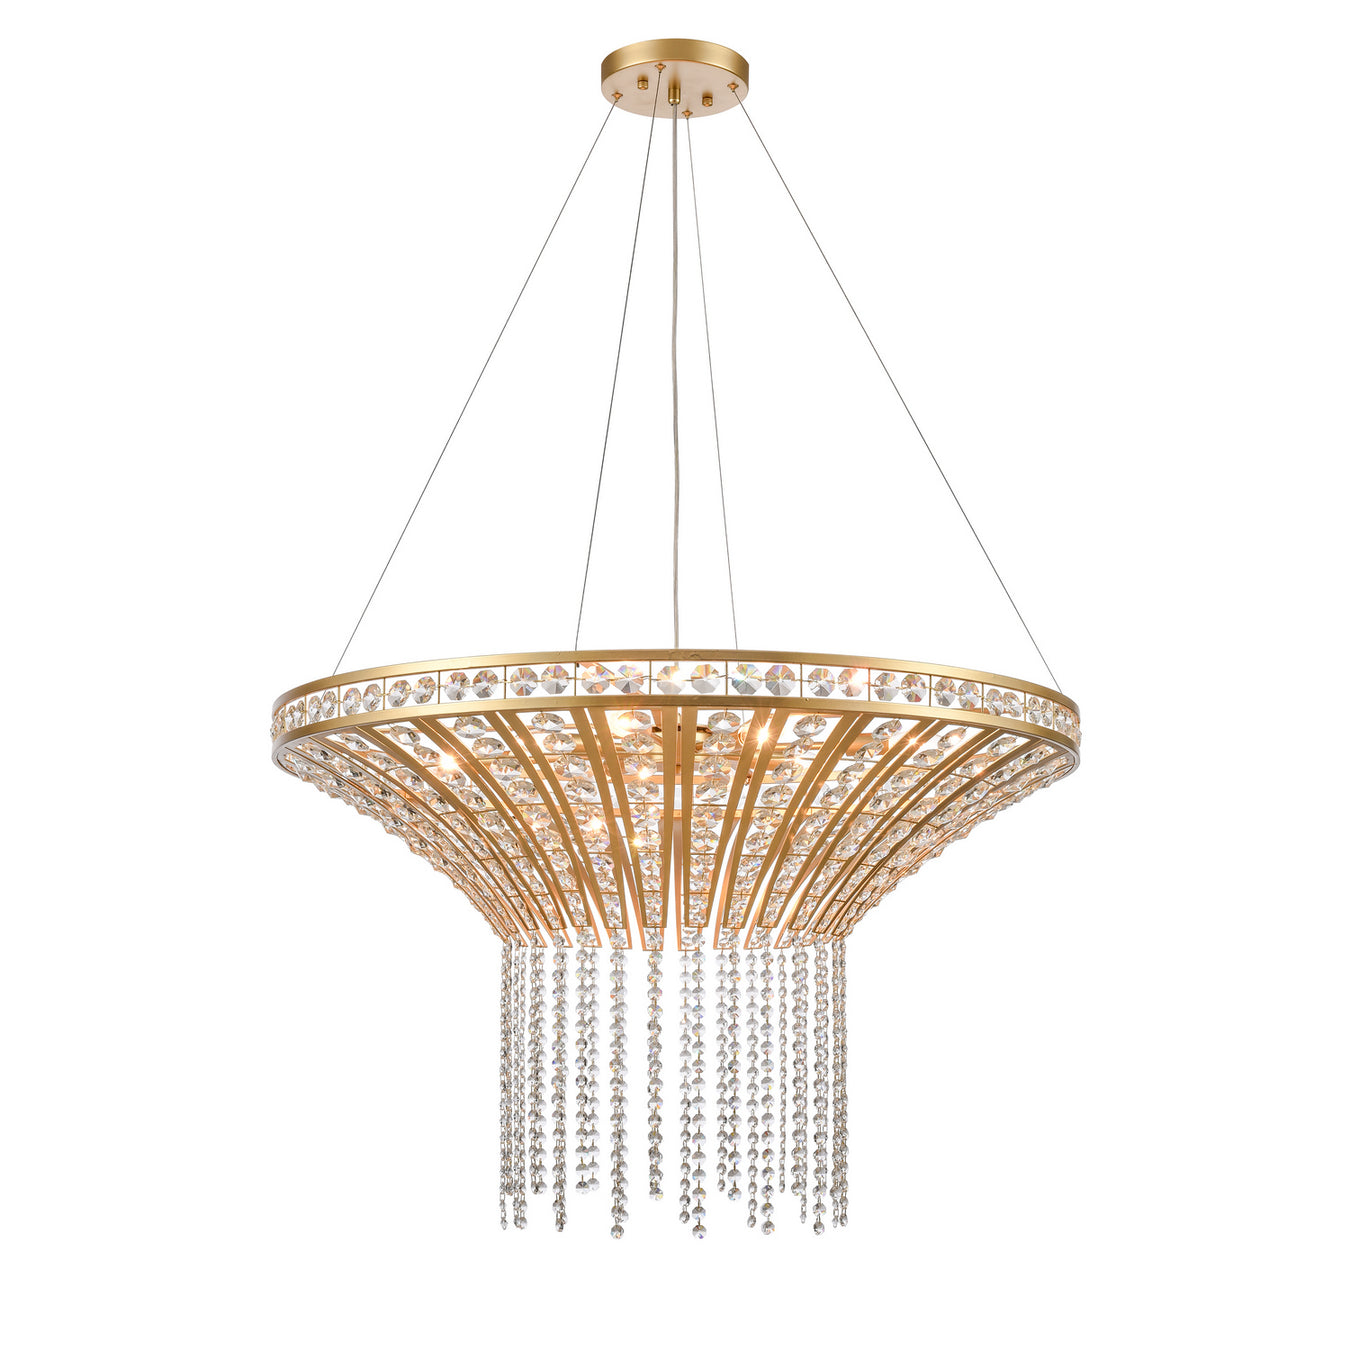 Fantania Eight Light Chandelier in Champagne Gold